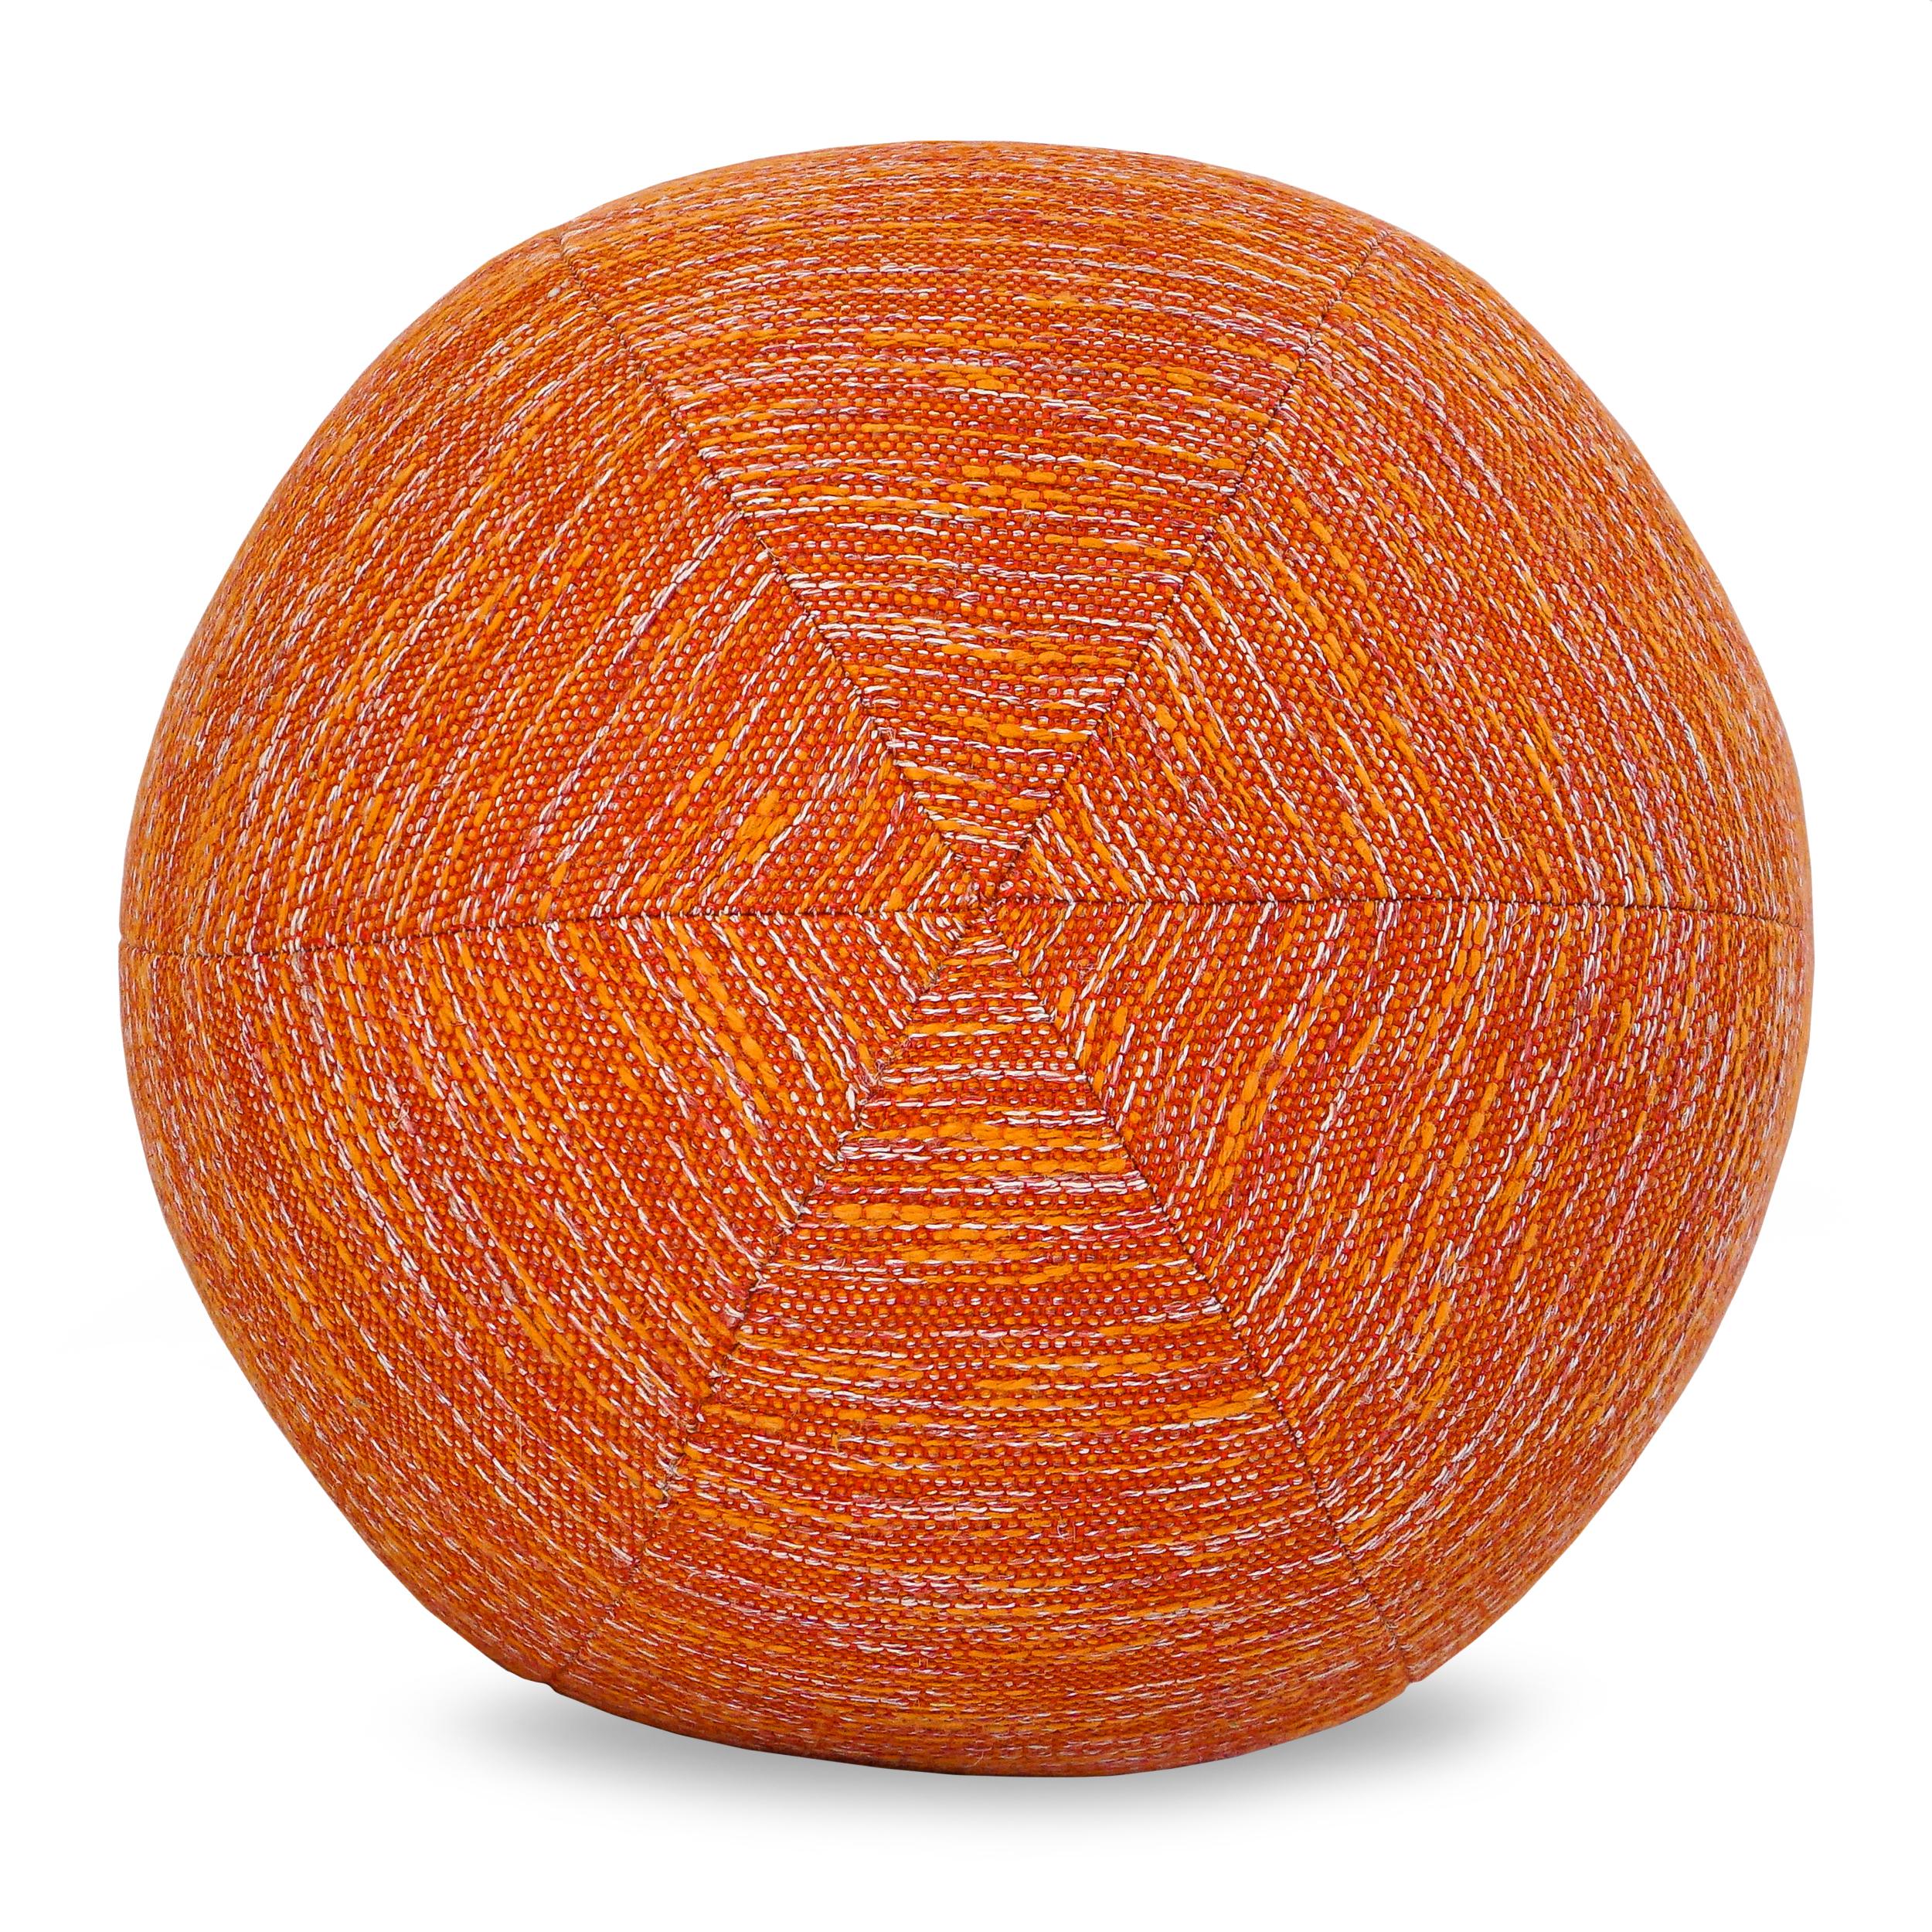 Embroidered textured orange fabric covers this ball pillow. Ball can be made in any fabric. Ask for current availability of pillow as shown. 

Overall: 12”W x 12”Dia.
Disclaimer: Due to their handcrafted nature, the final size and shape of our Ball